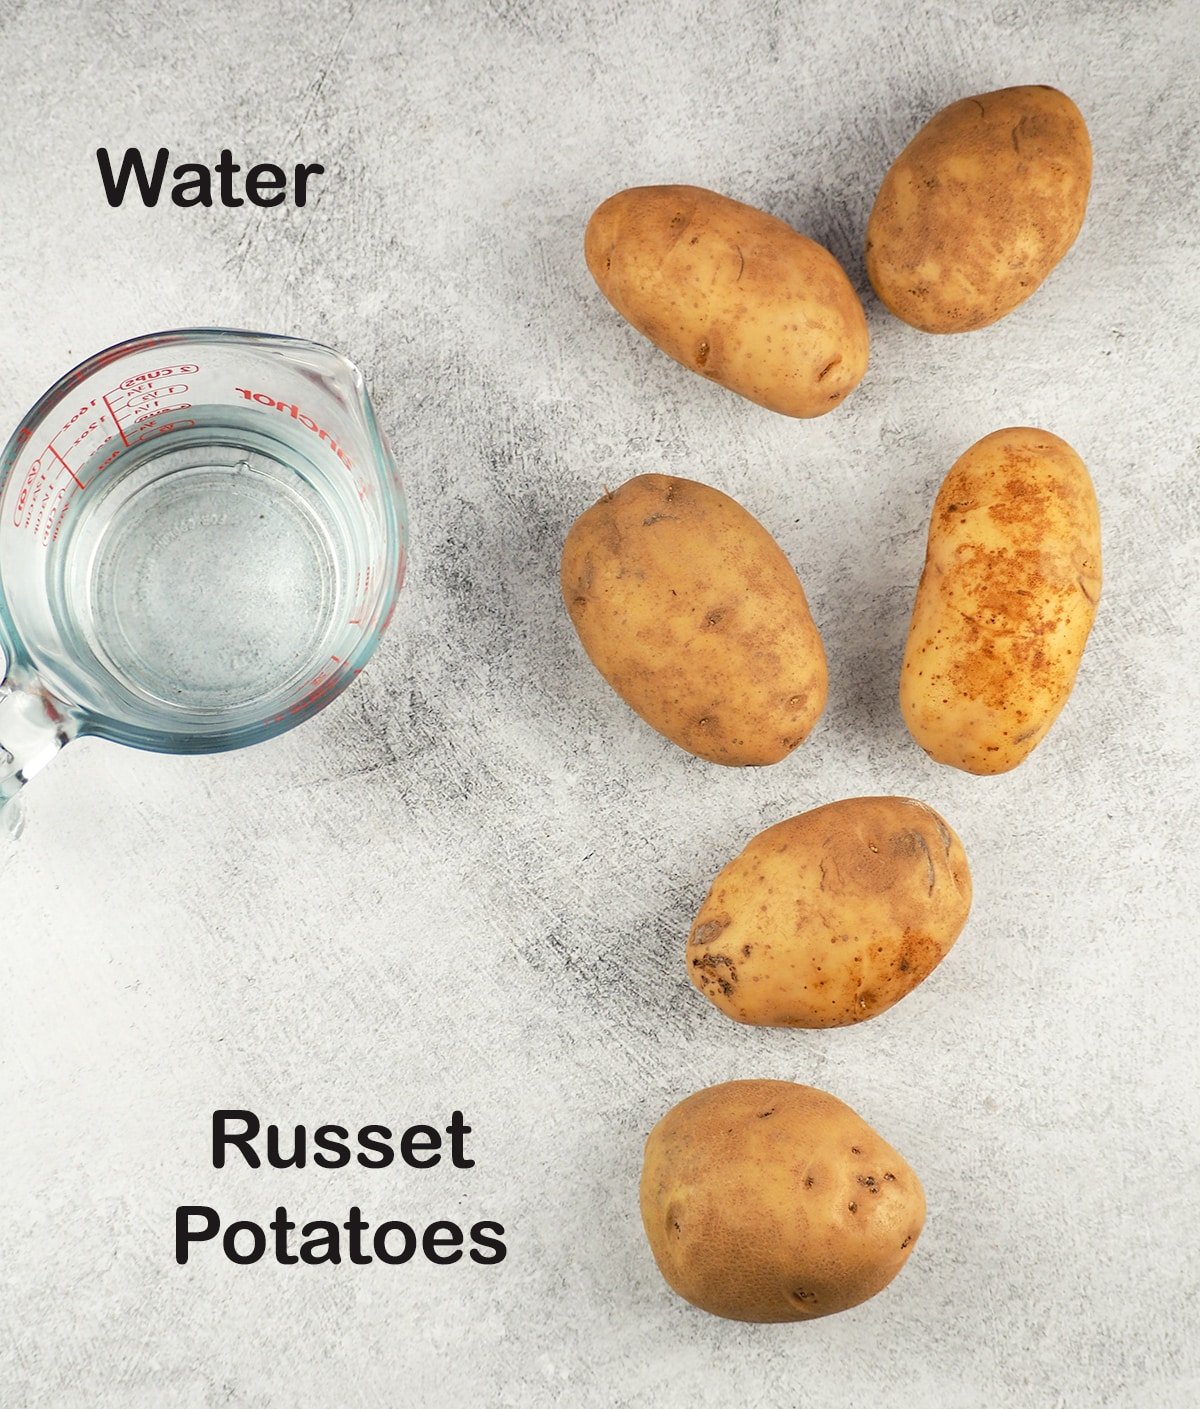 ingredients for baked potatoes